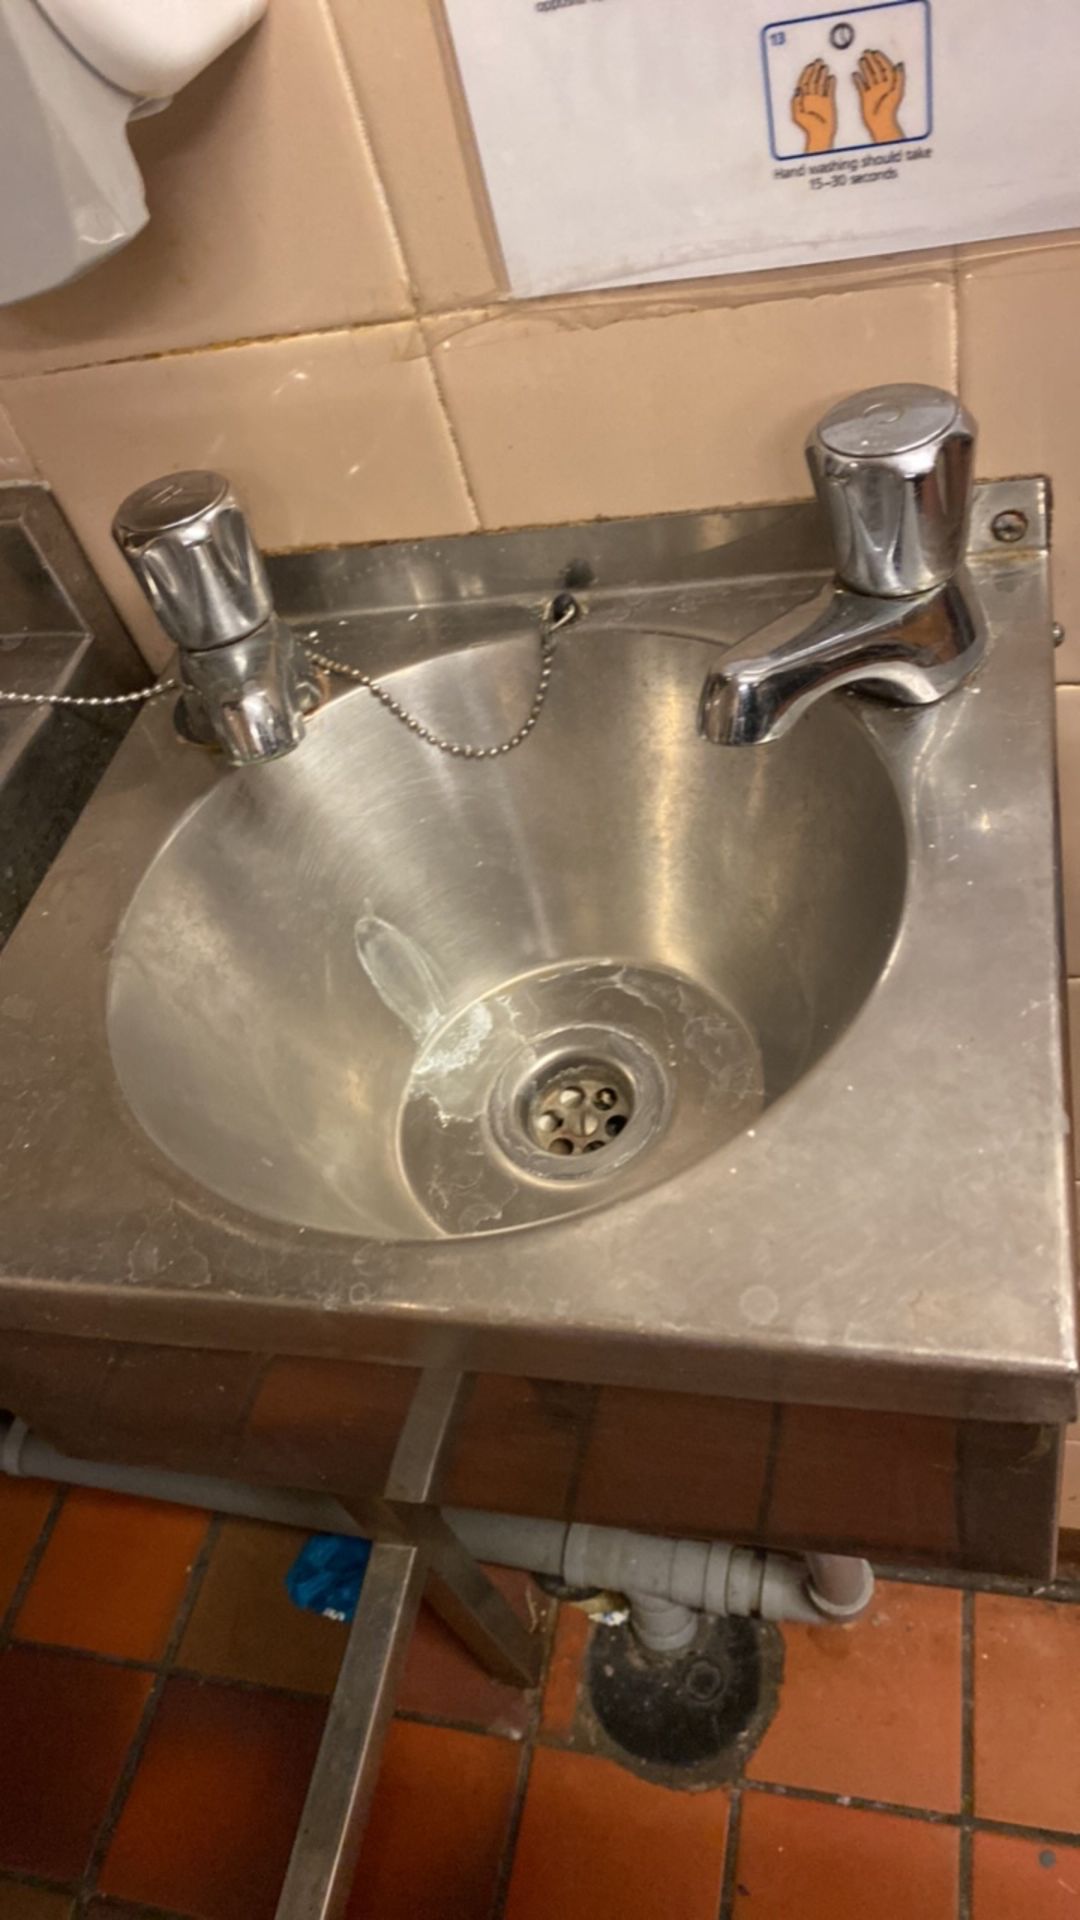 Stainless Steel Sink Unit With Wall Shelving & Sink Includes Items Shown On Image - Image 3 of 15